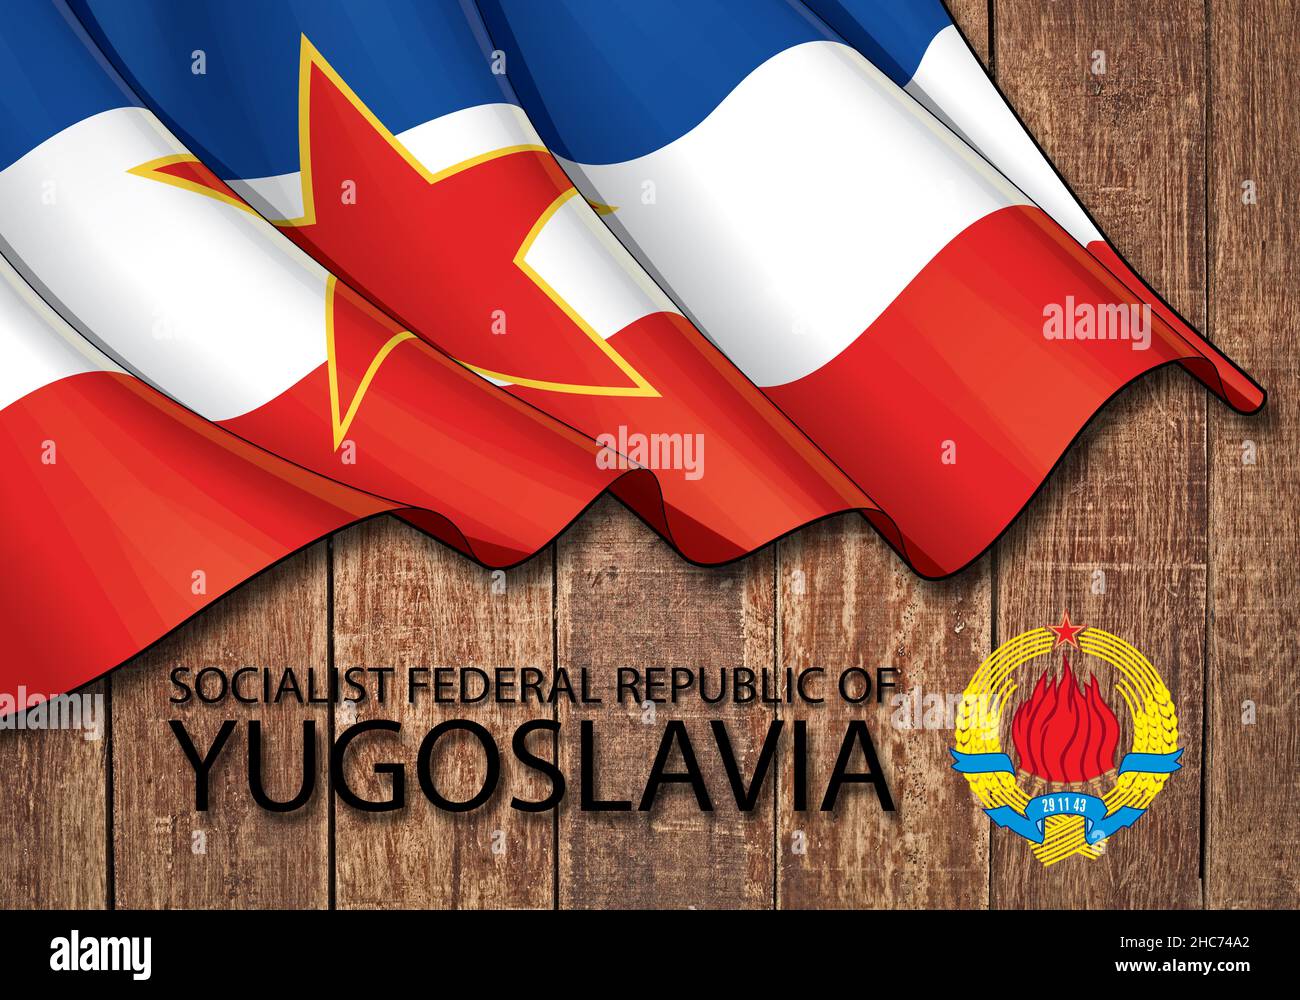 Flag and emblem of the Socialist Federal Republic of Yugoslavia on a wooden background Stock Photo